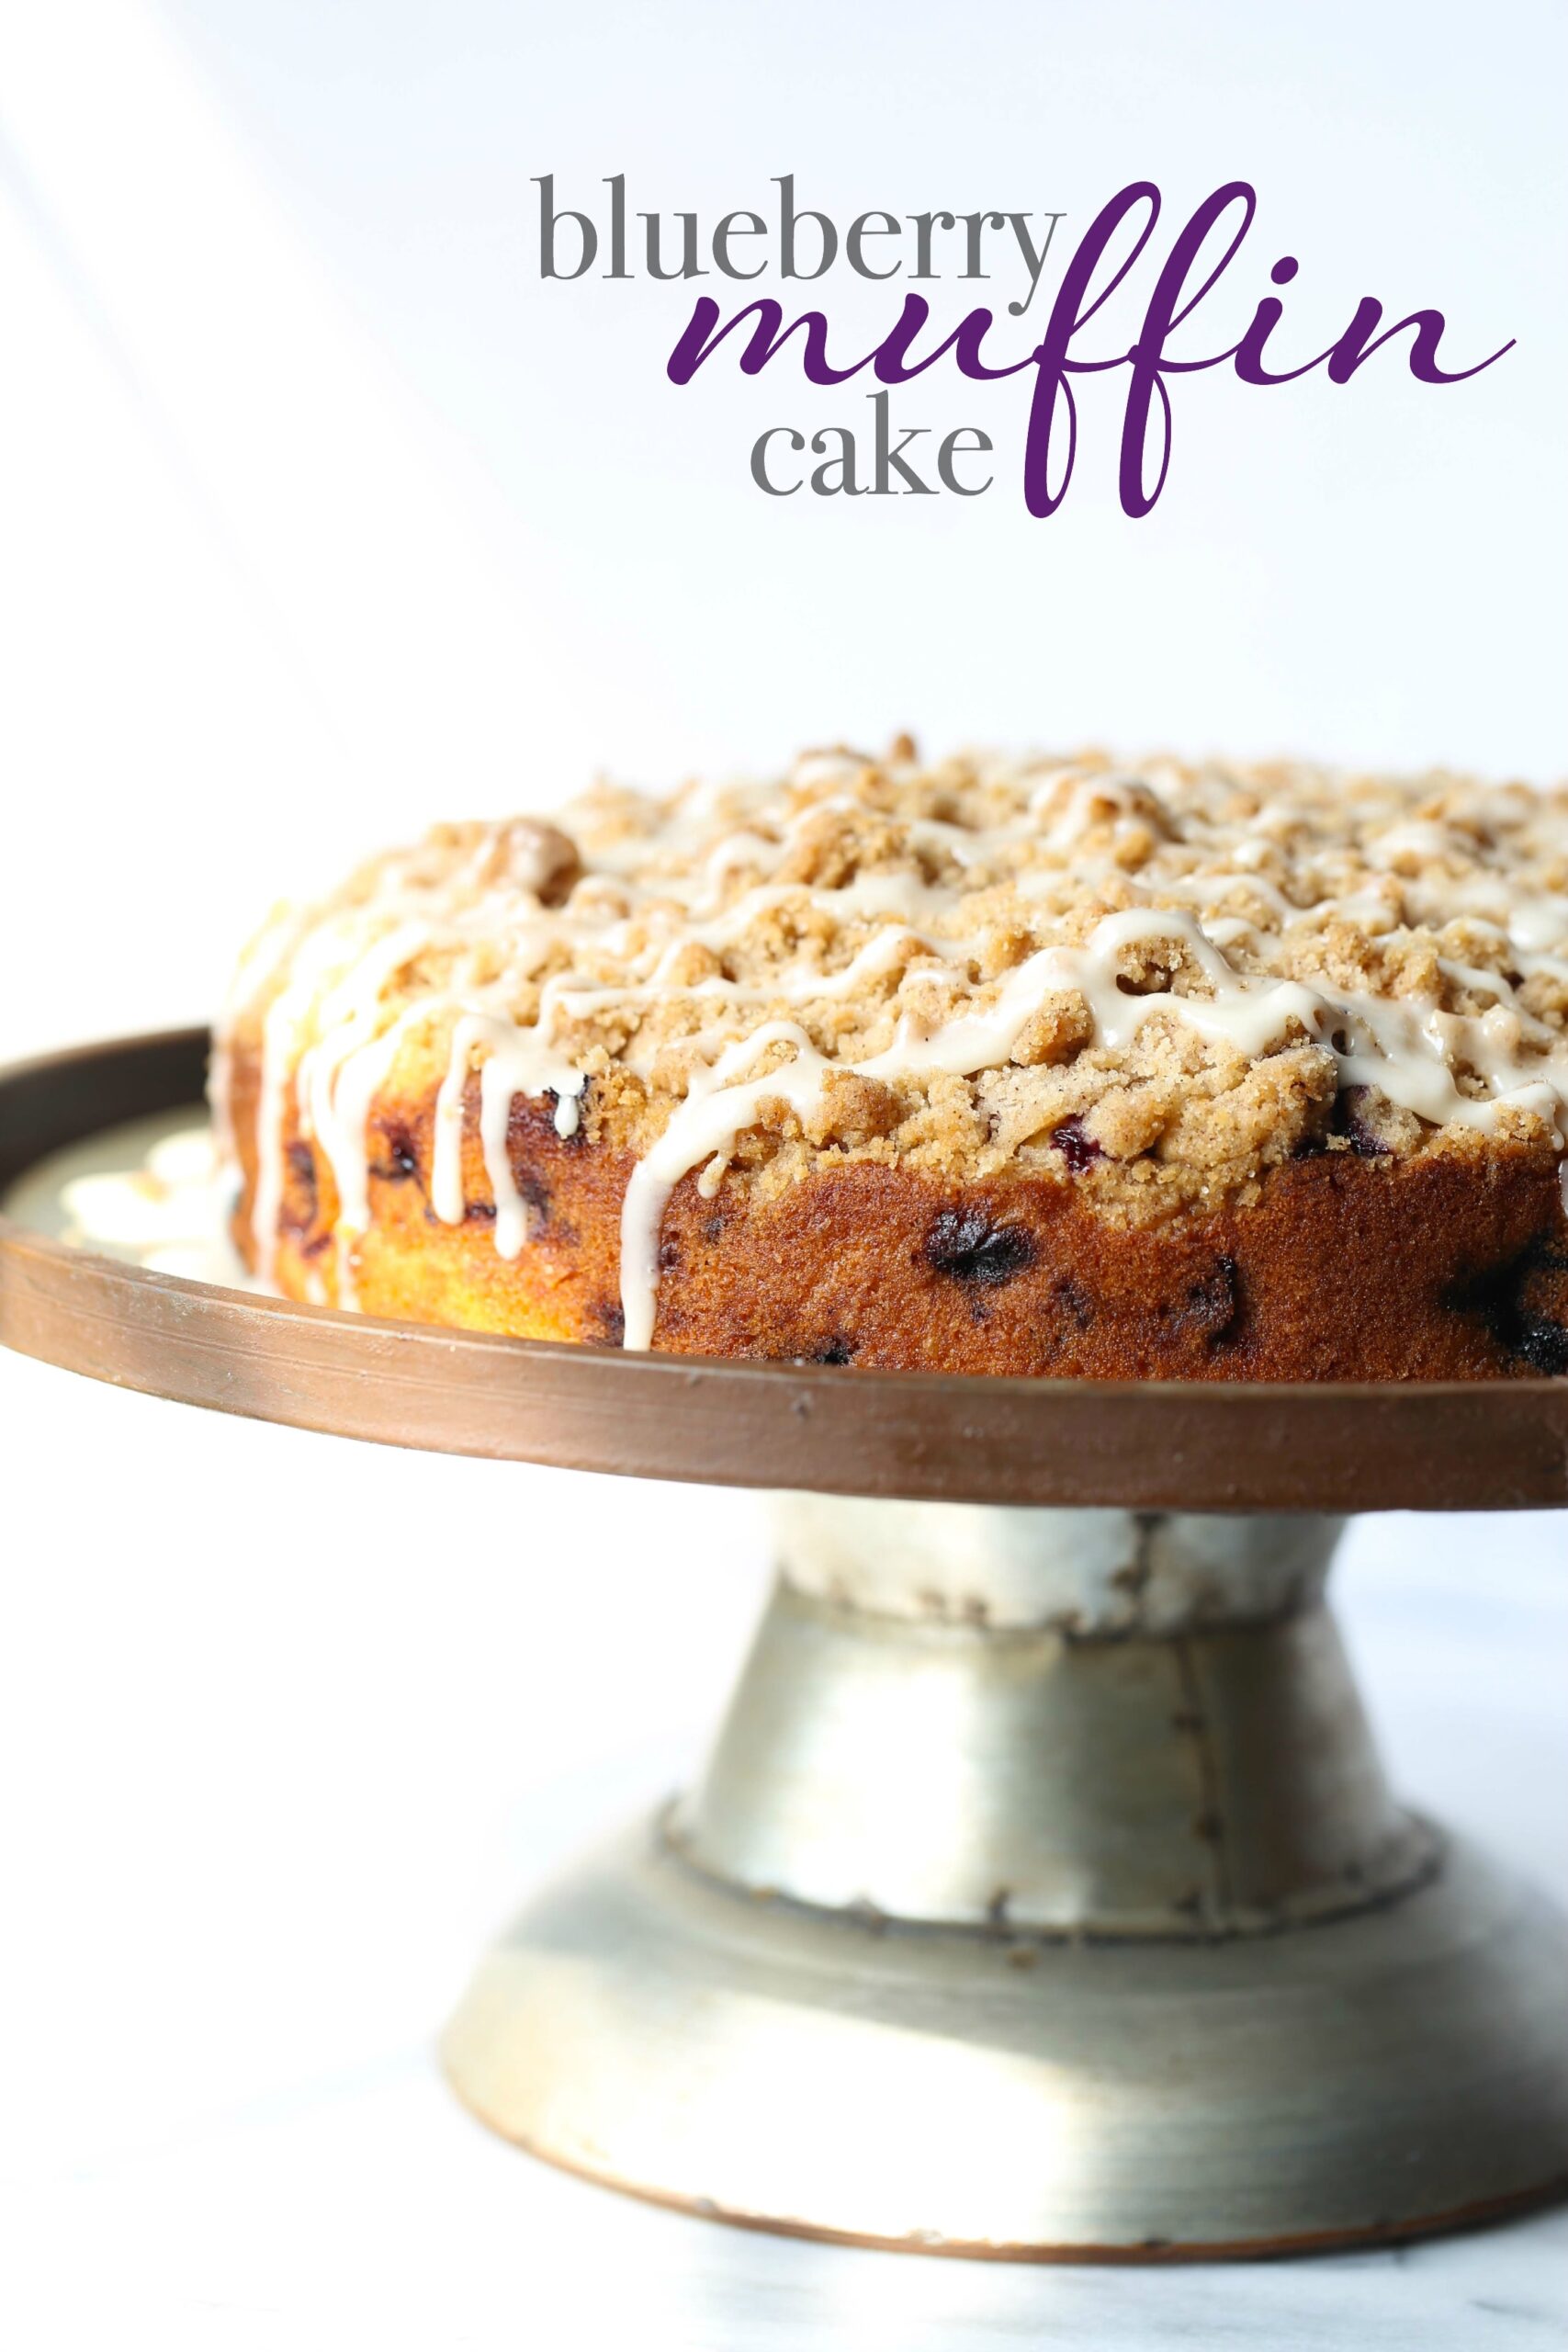 Blueberry Muffin Cake | The Best Blueberry Crumble Cake